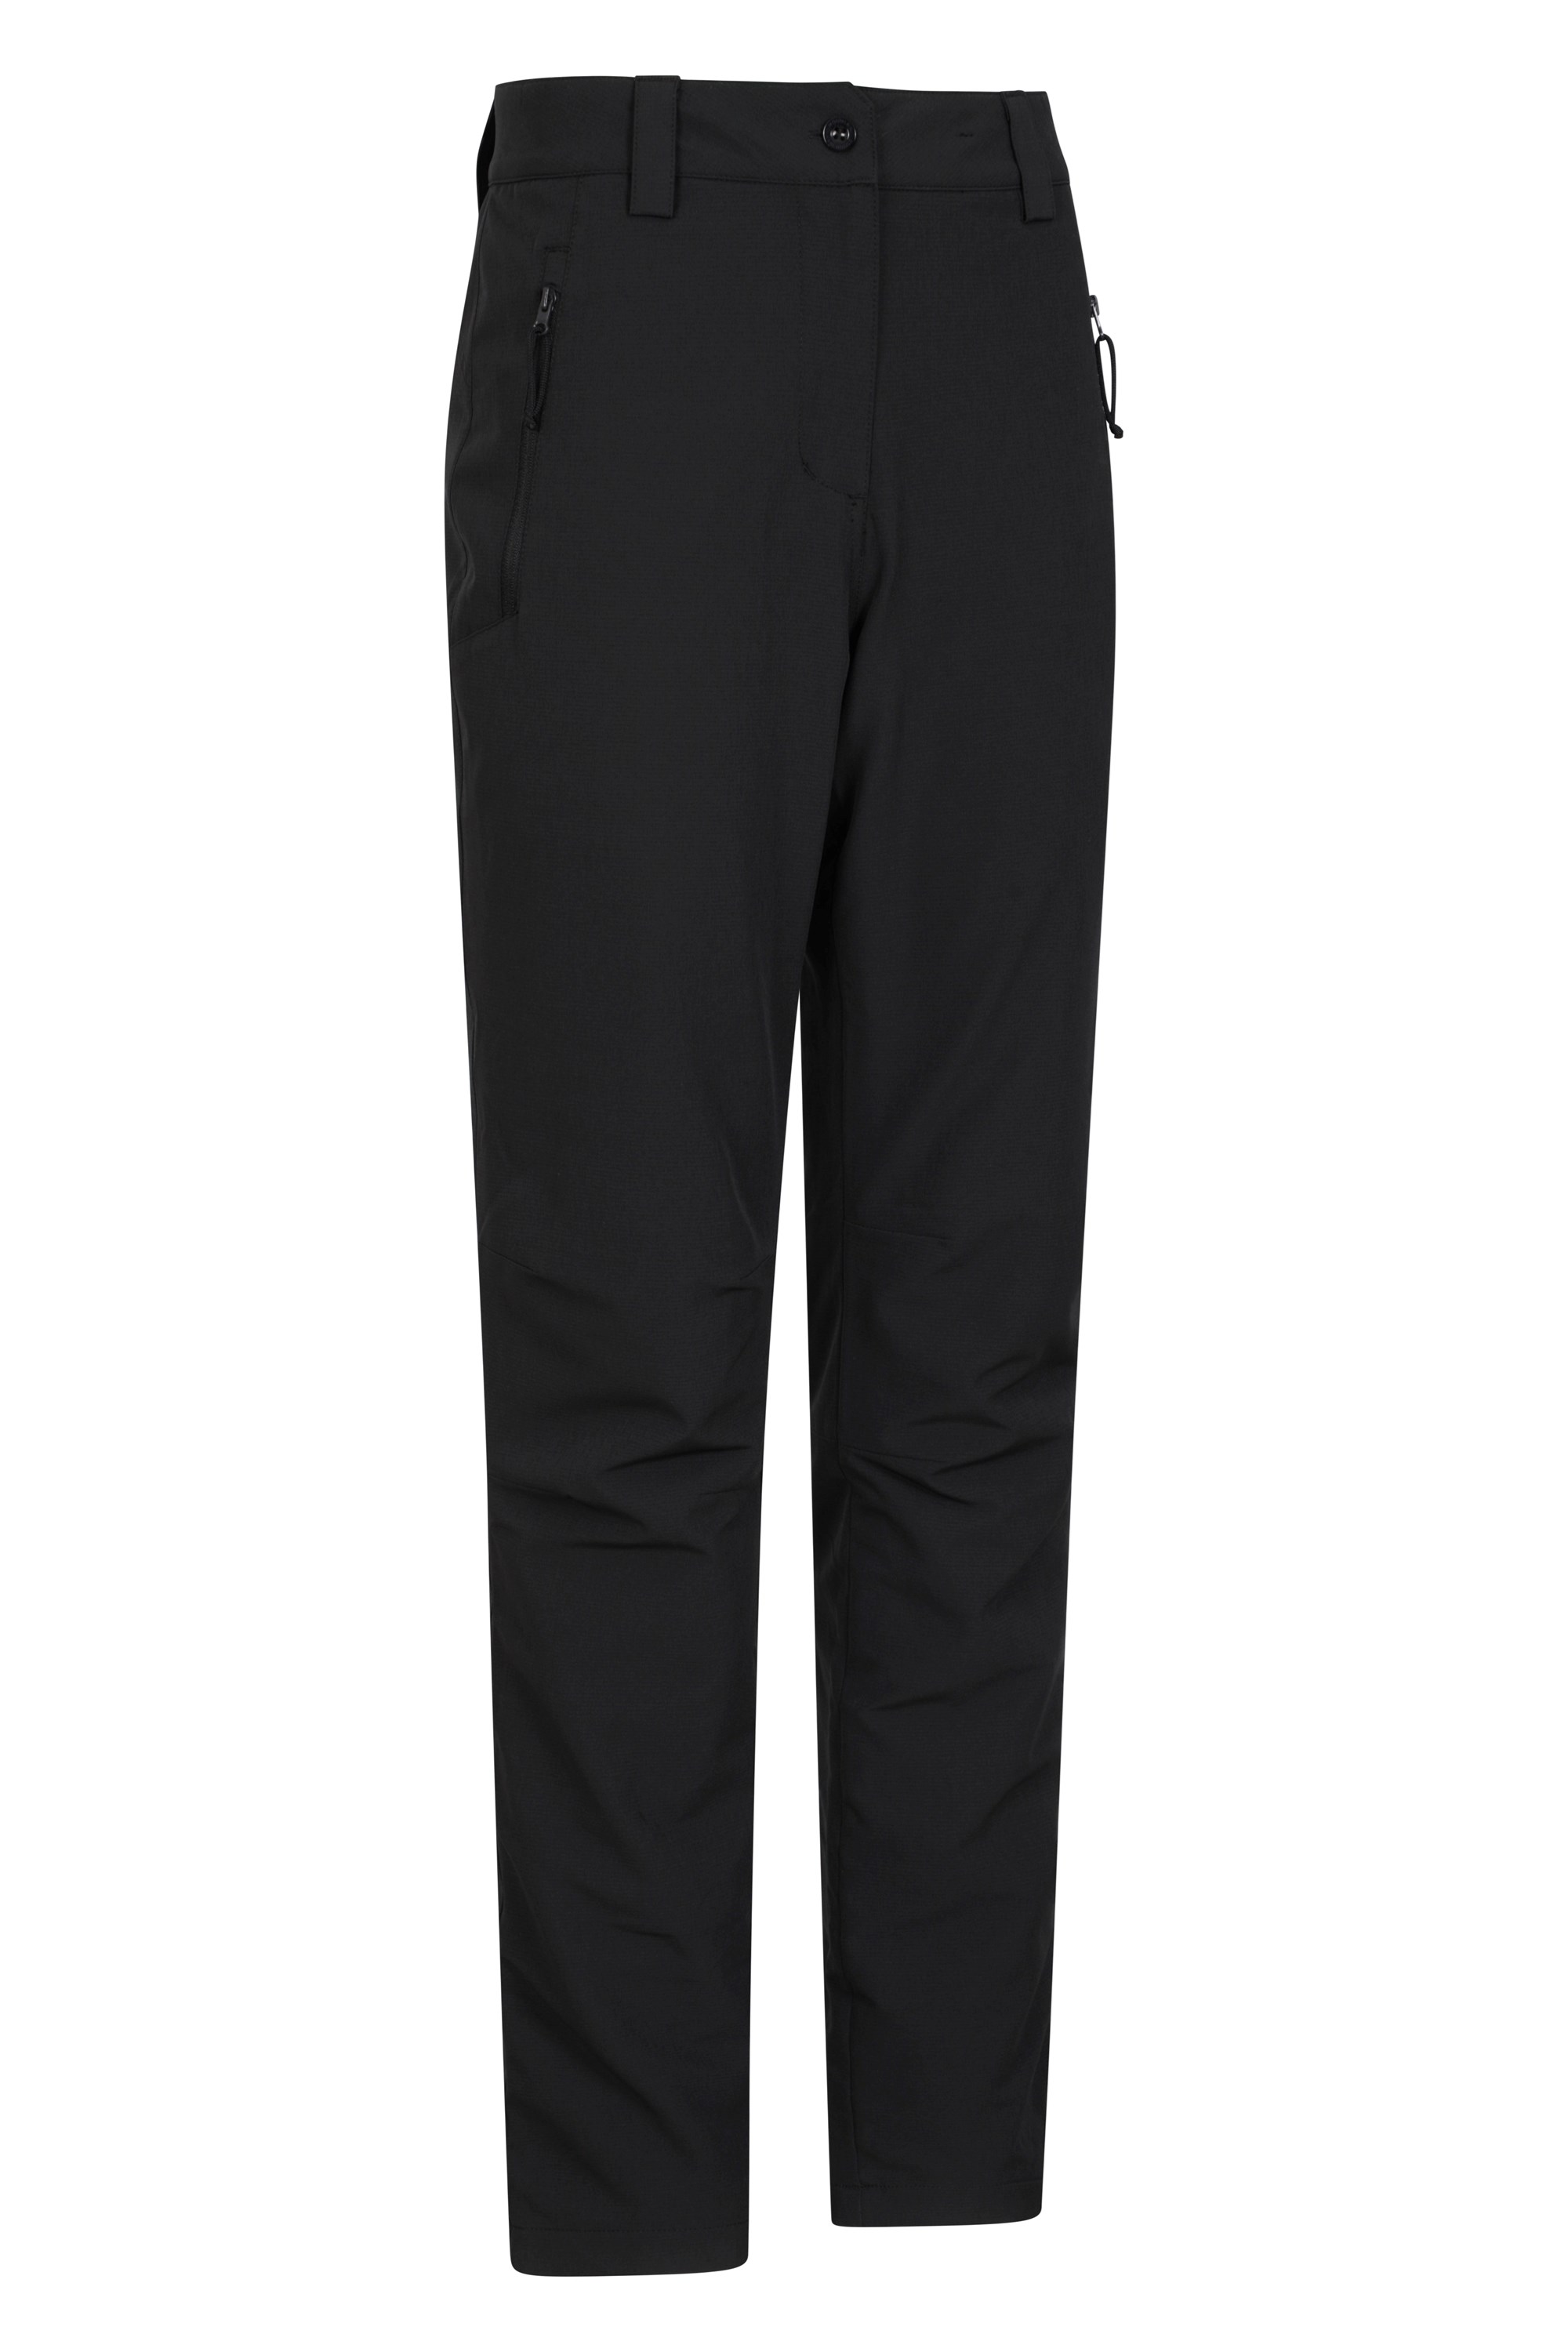 Mens Thermal Lined Fully Elasticated Pull On Trousers